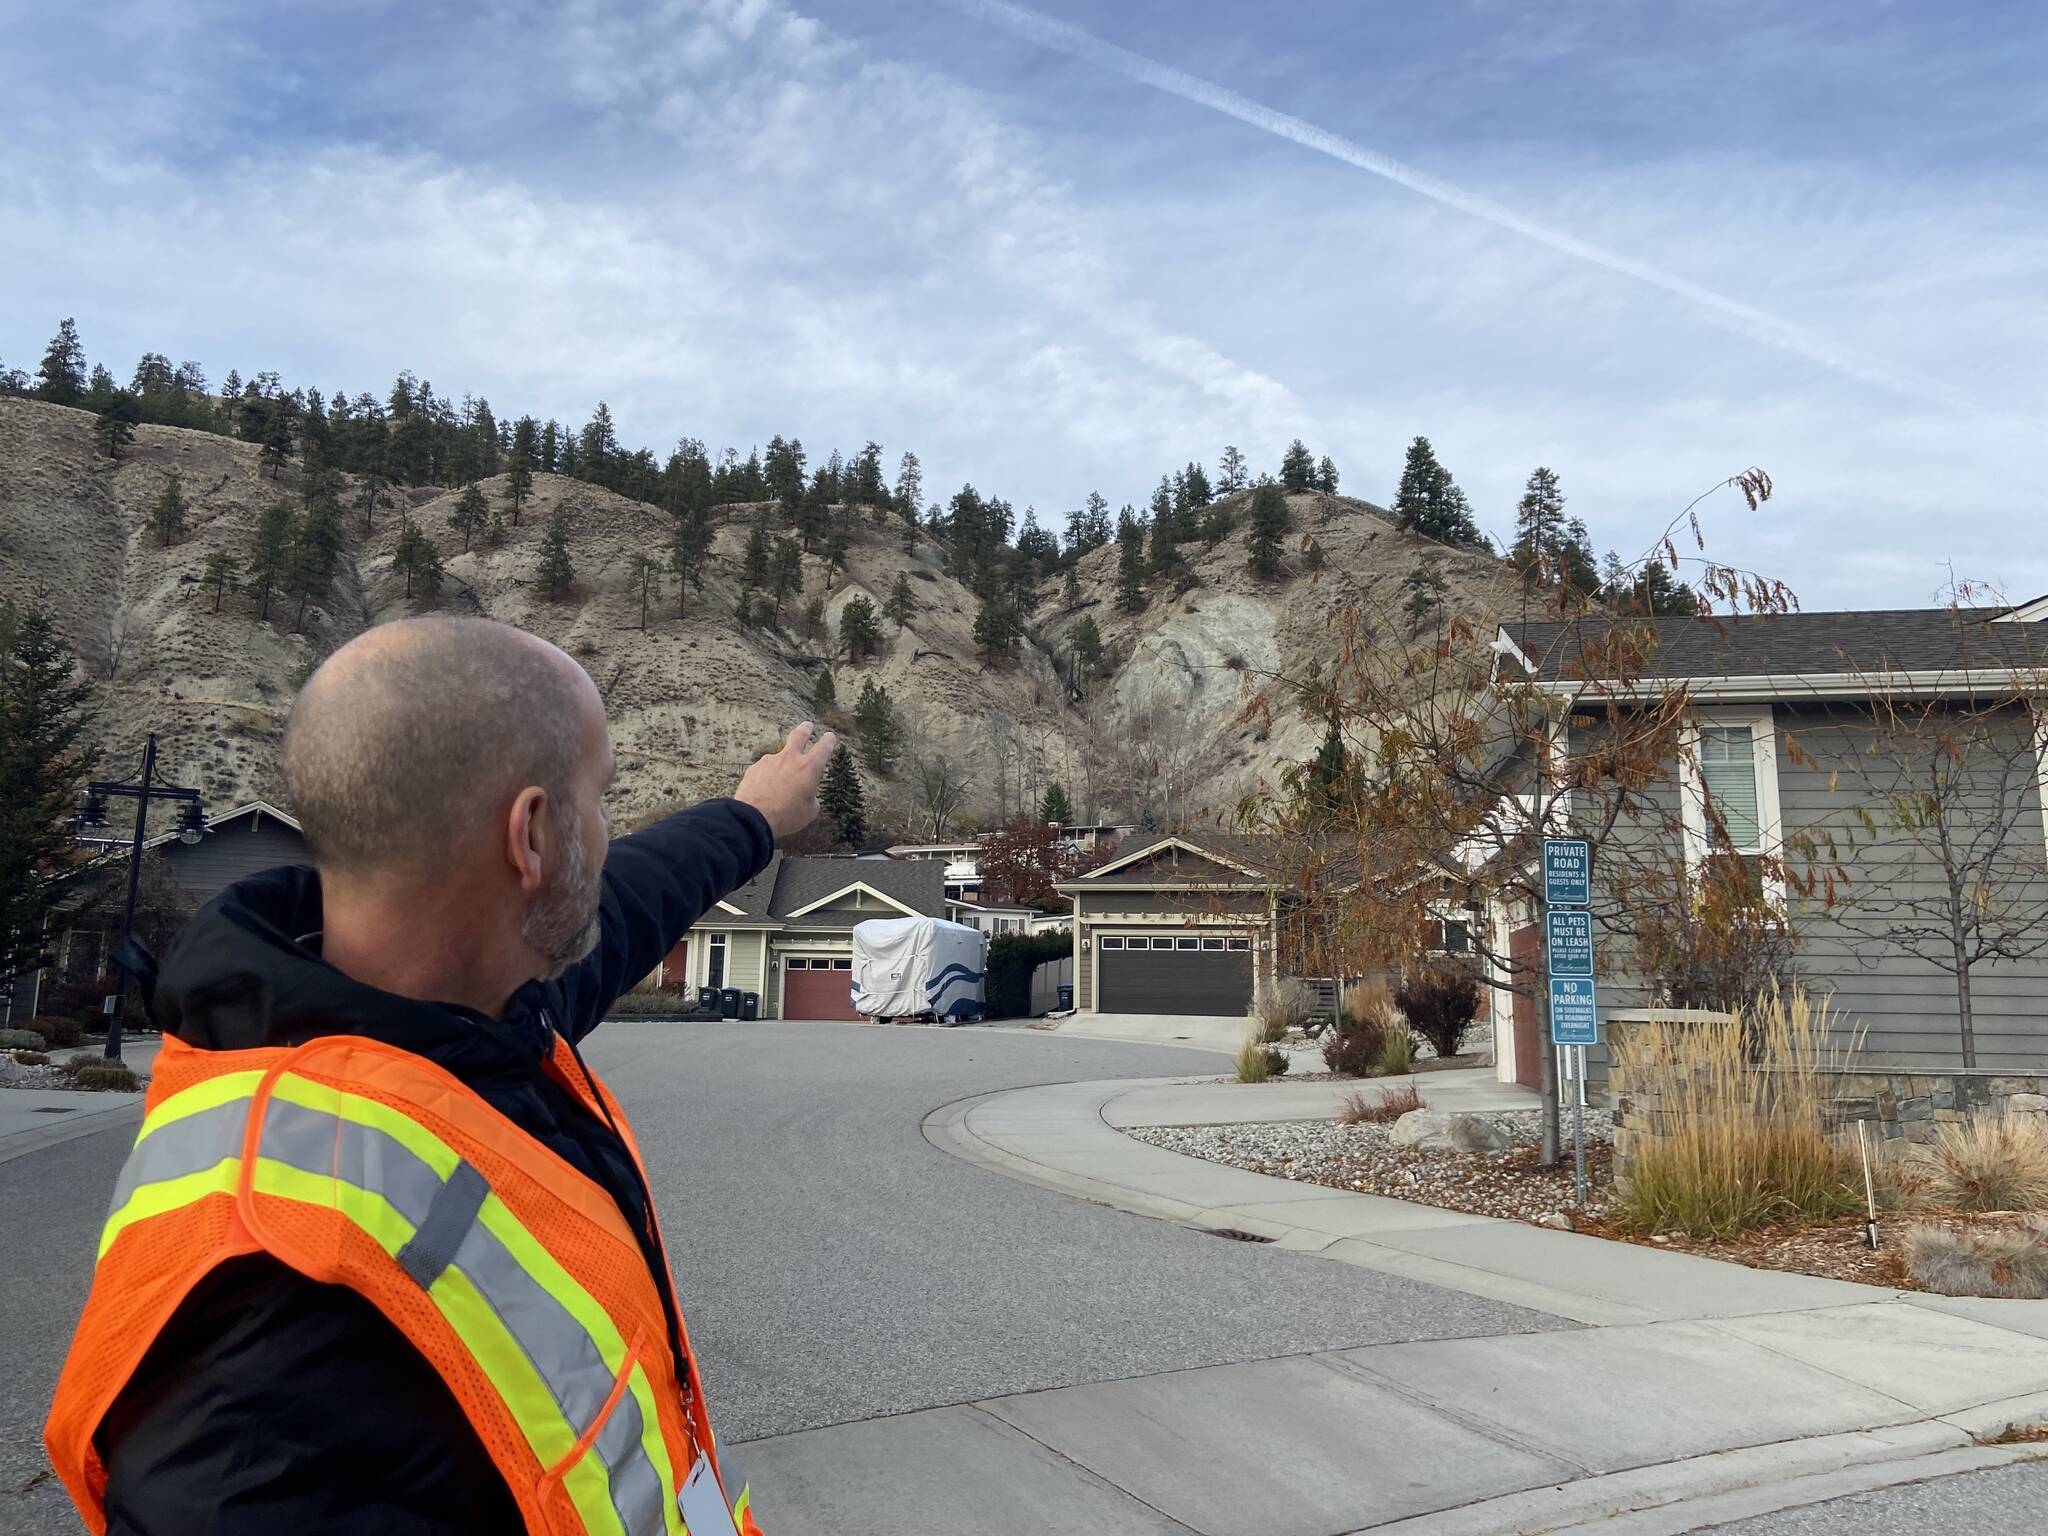 City of Penticton staff member Len Robson points to a rock face that is moving and has potential of breaking away, which lead to evacuations for 24 properties on Penticton Avenue. (Monique Tamminga - Western News)